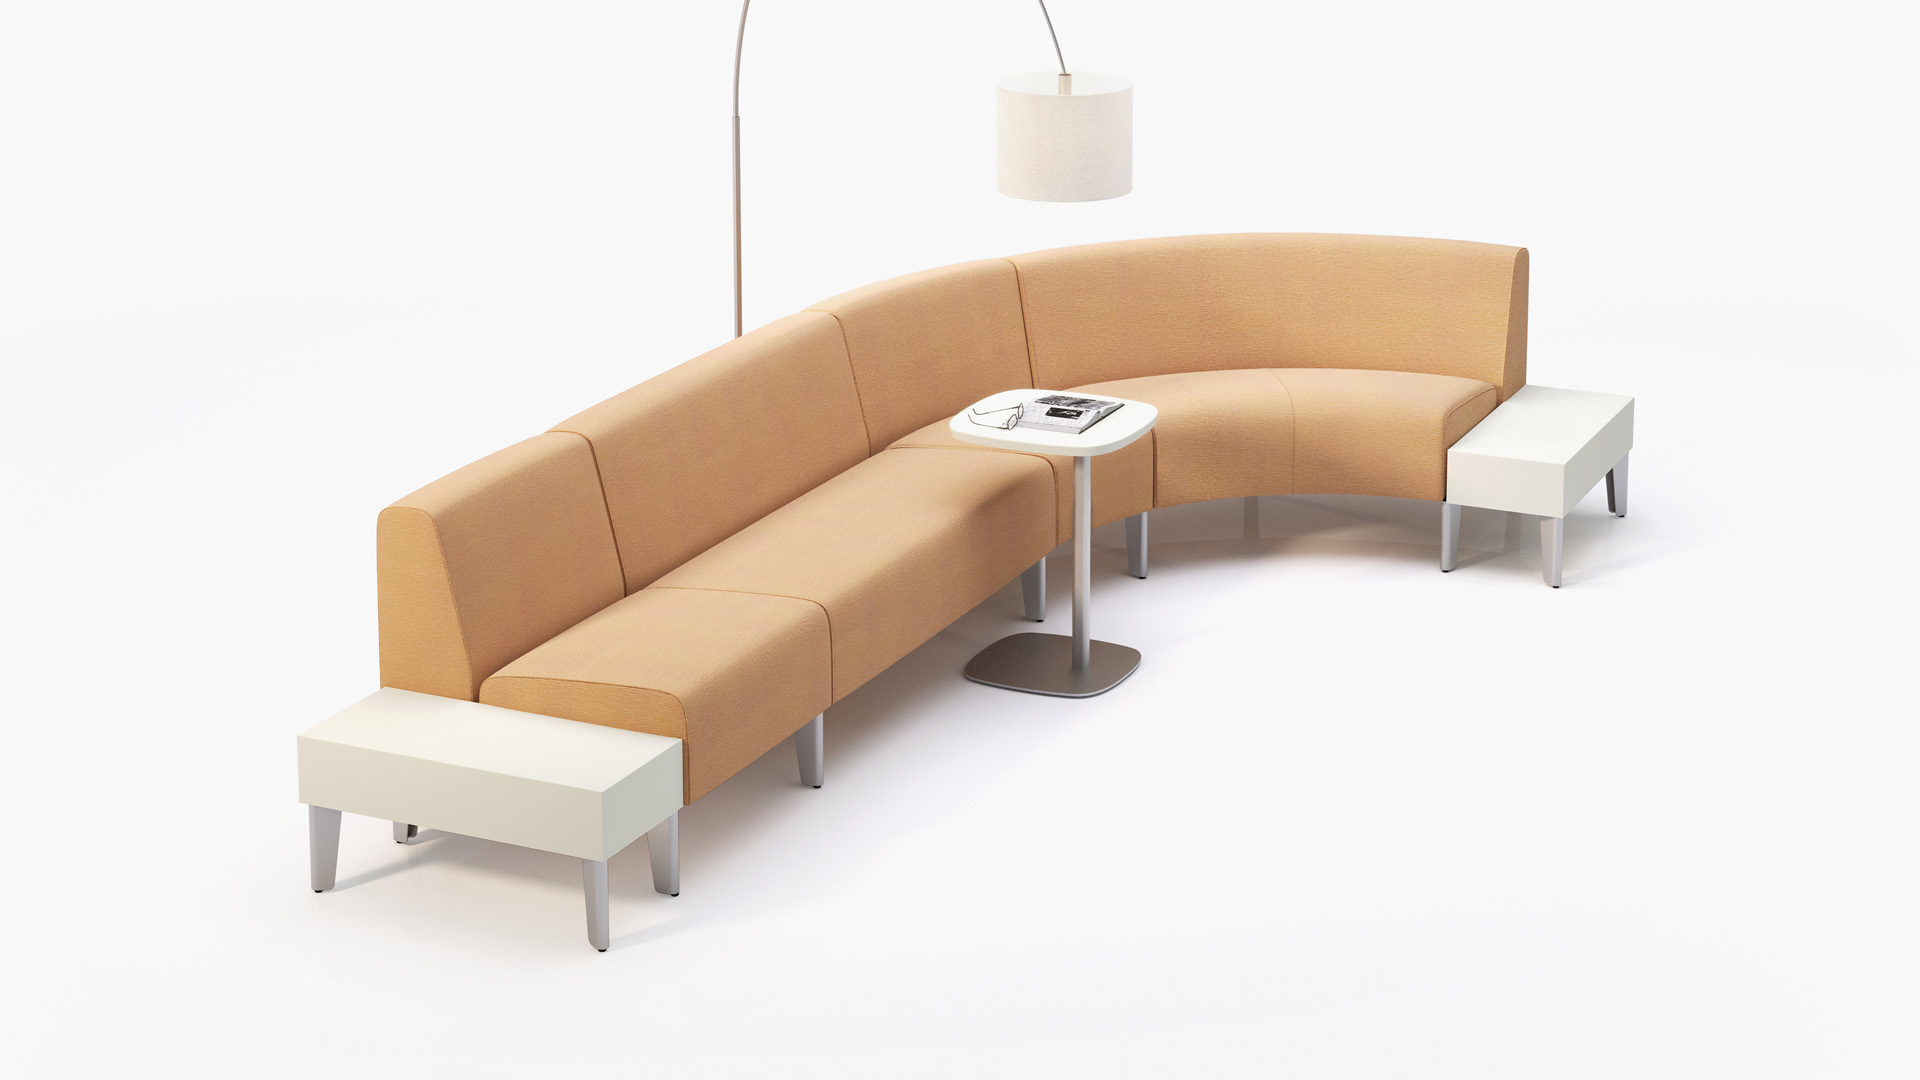 Avlia configuration with single depth tables, lounge chair, sofa, inside wedge and inside quarter.